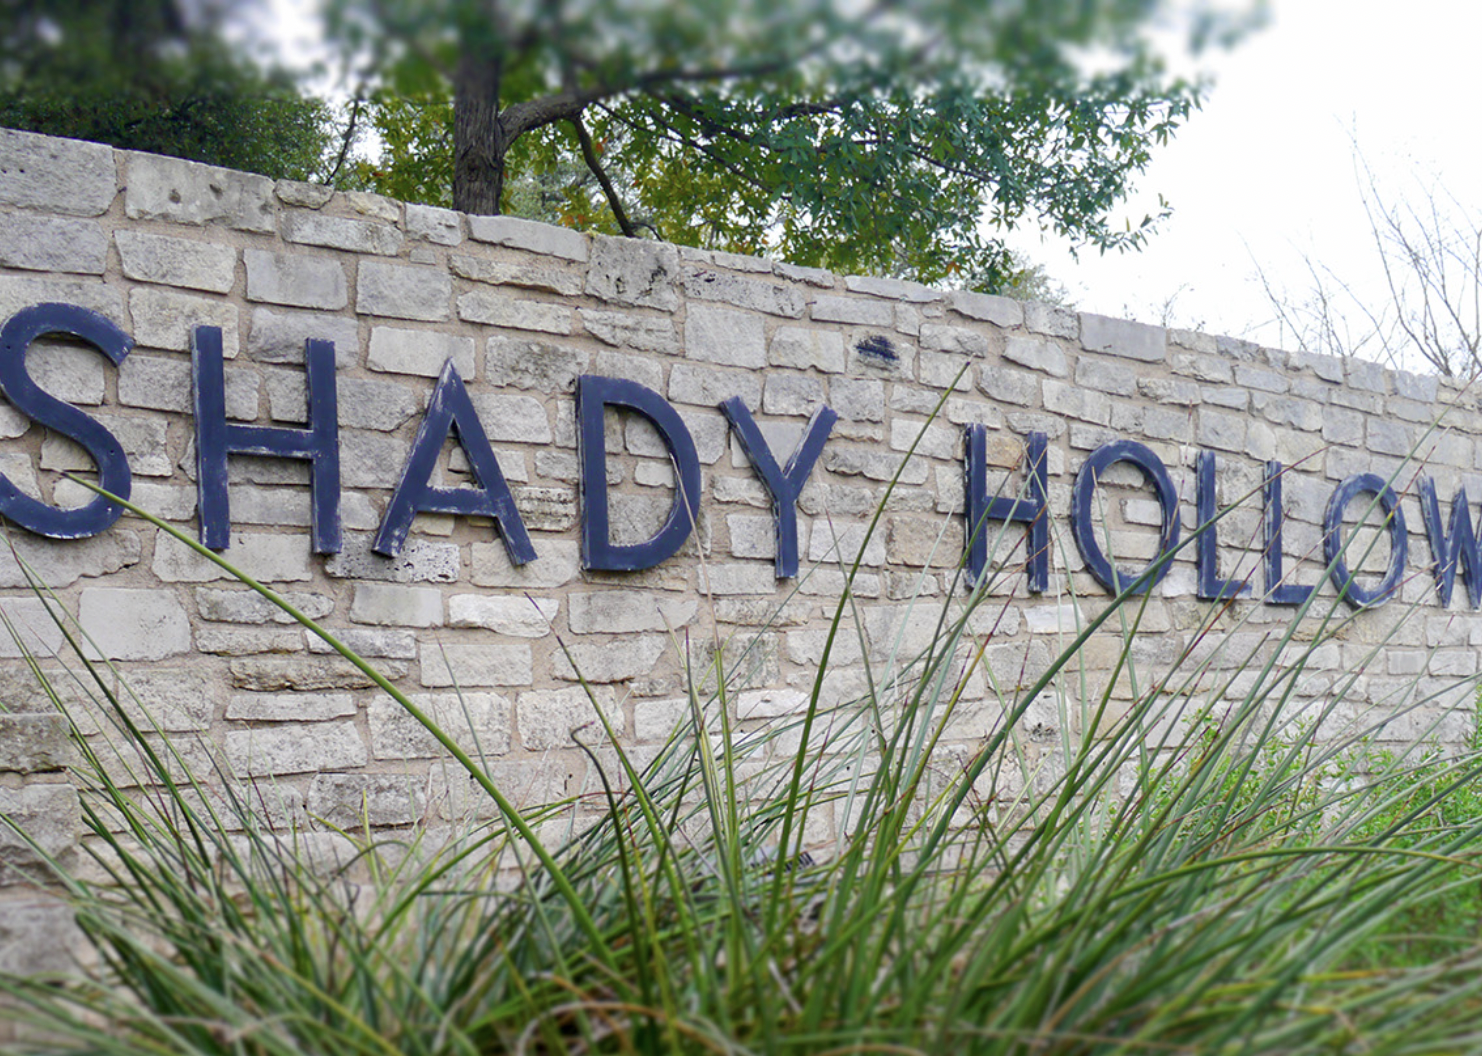 A brick sign for Shady Hollow.